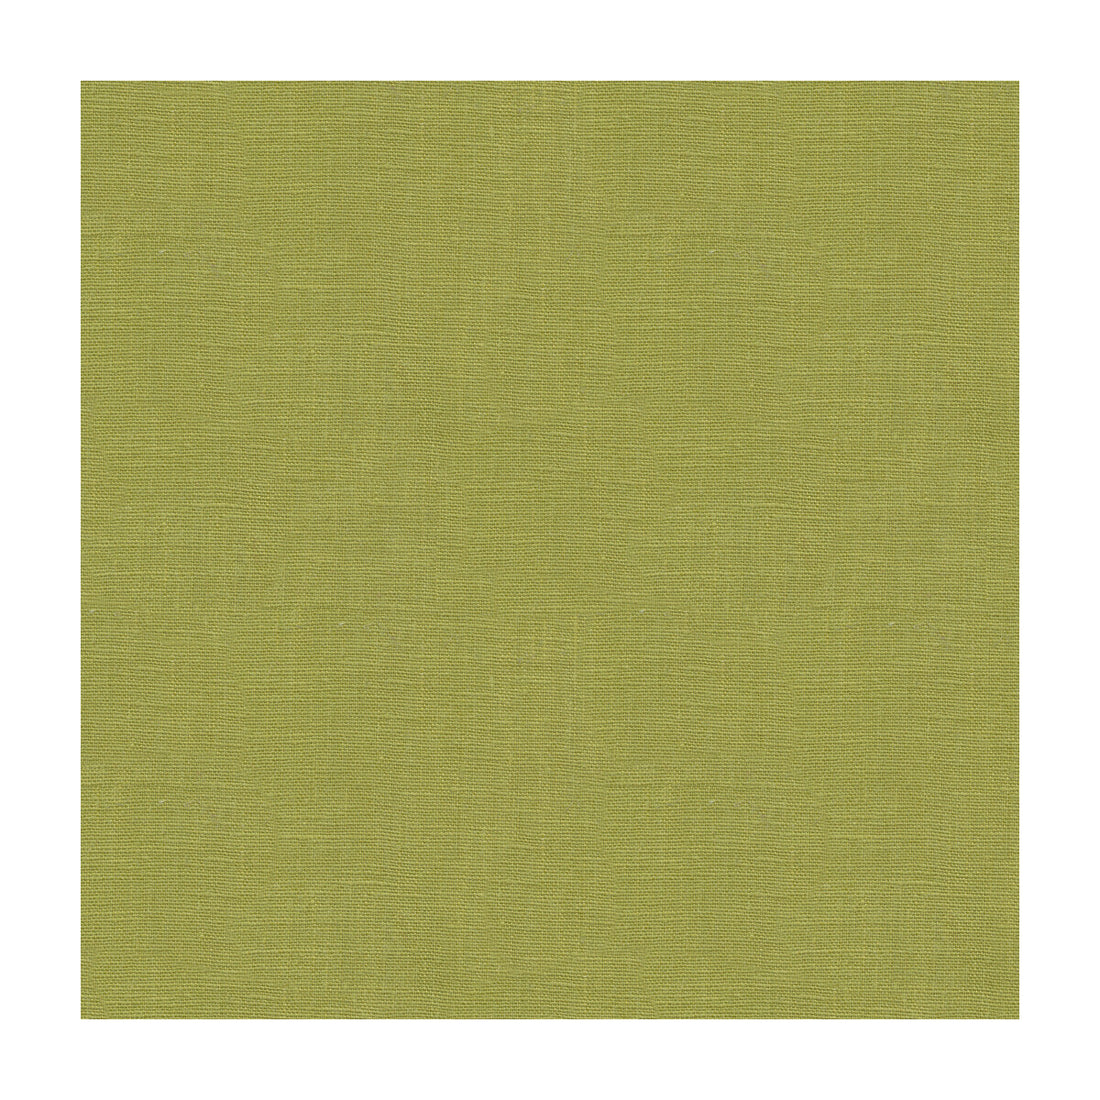 Dublin Linen fabric in meadow color - pattern 2012175.3.0 - by Lee Jofa in the Colour Complements II collection